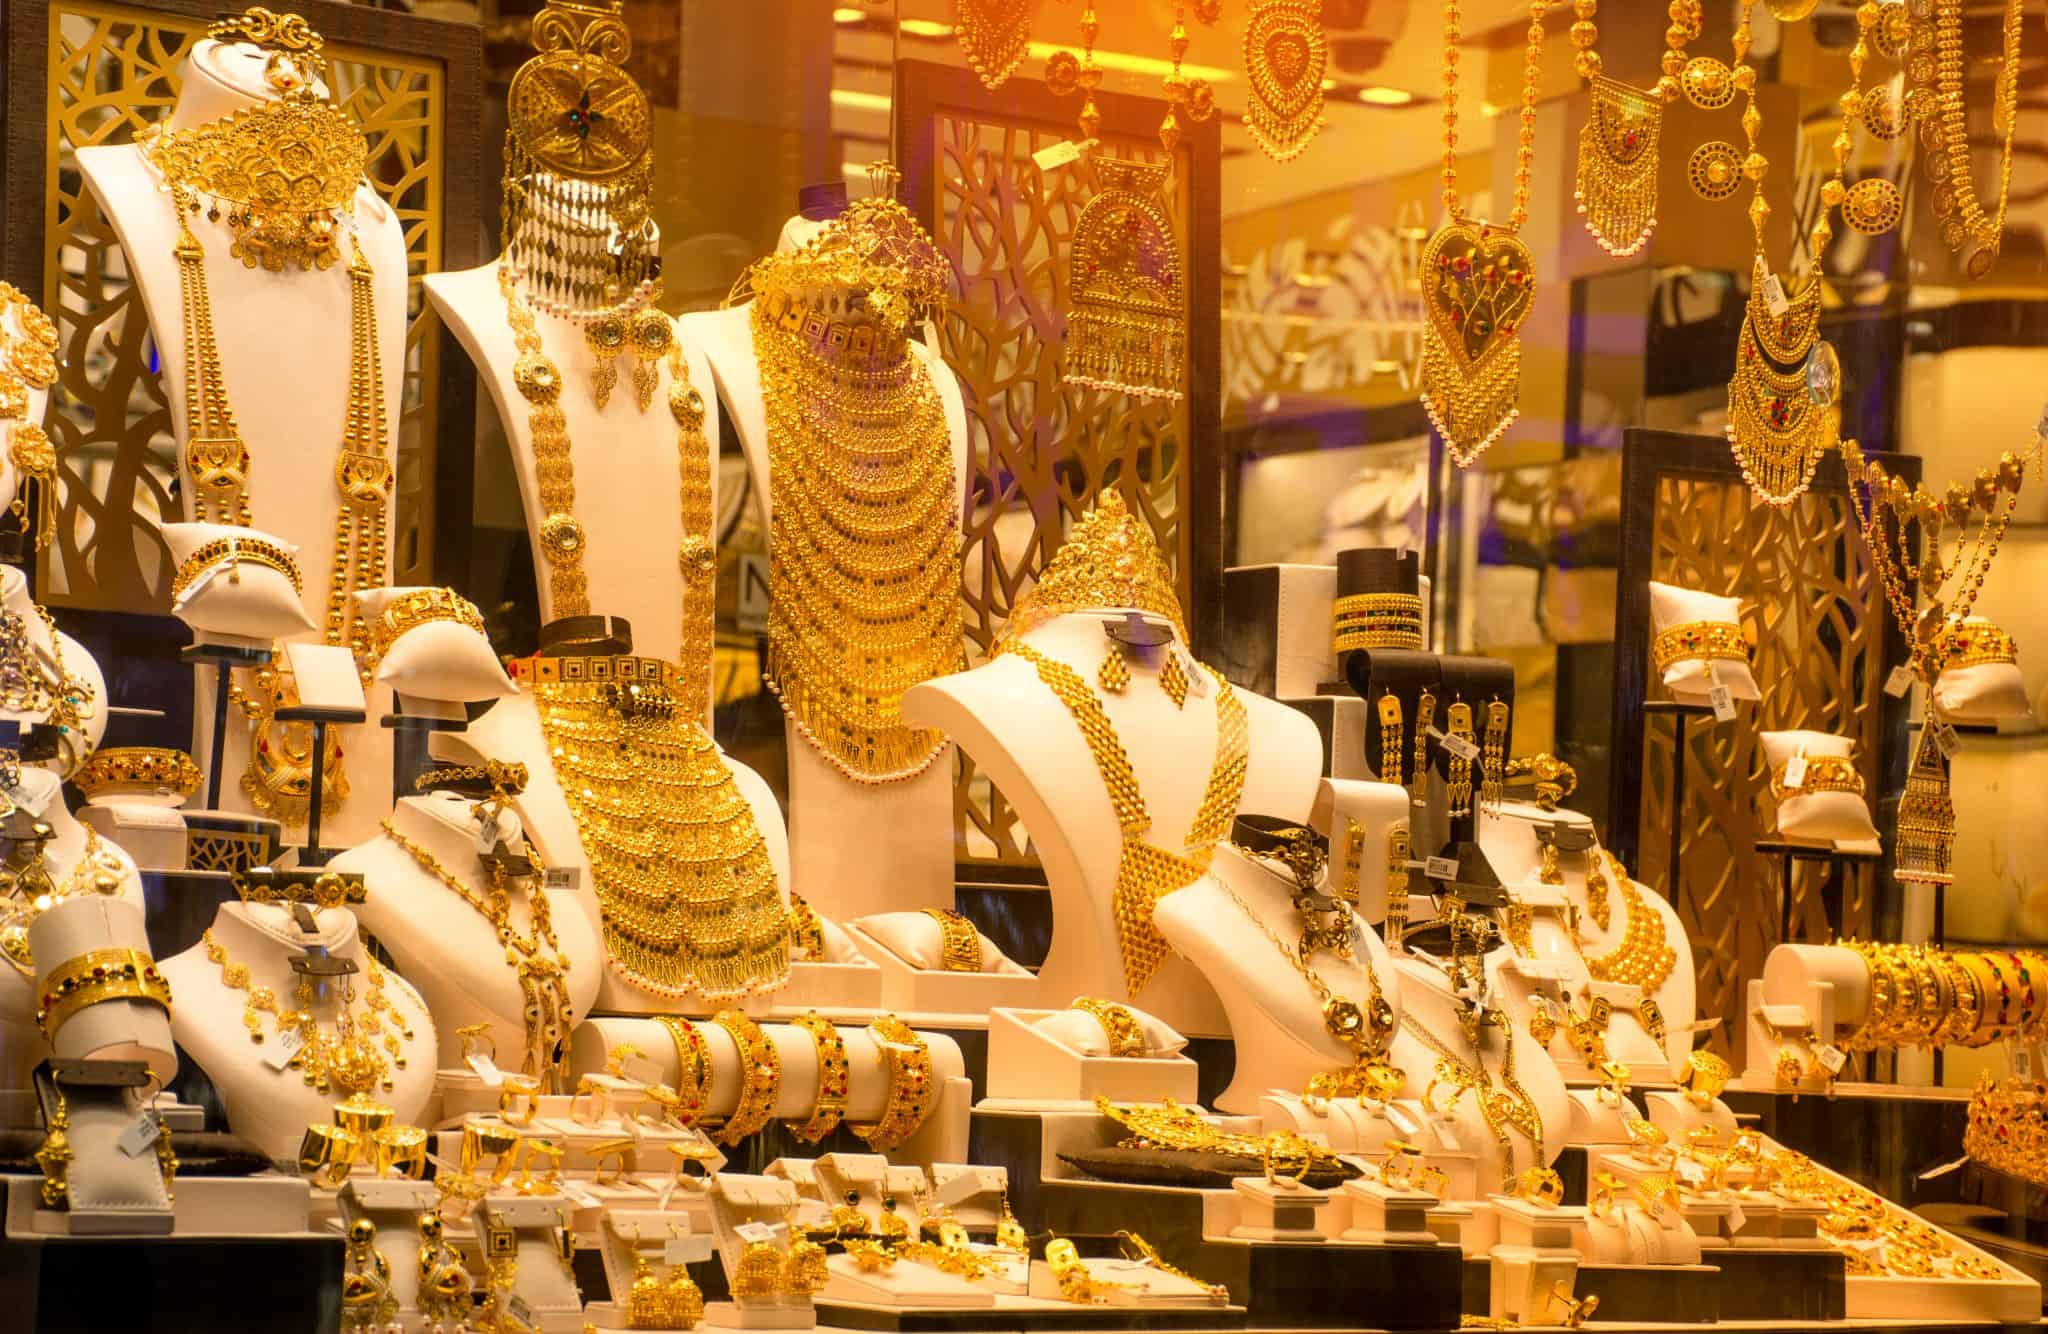 Tips for Negotiating a Deal at the Dubai Gold Market | IFG Featured Image